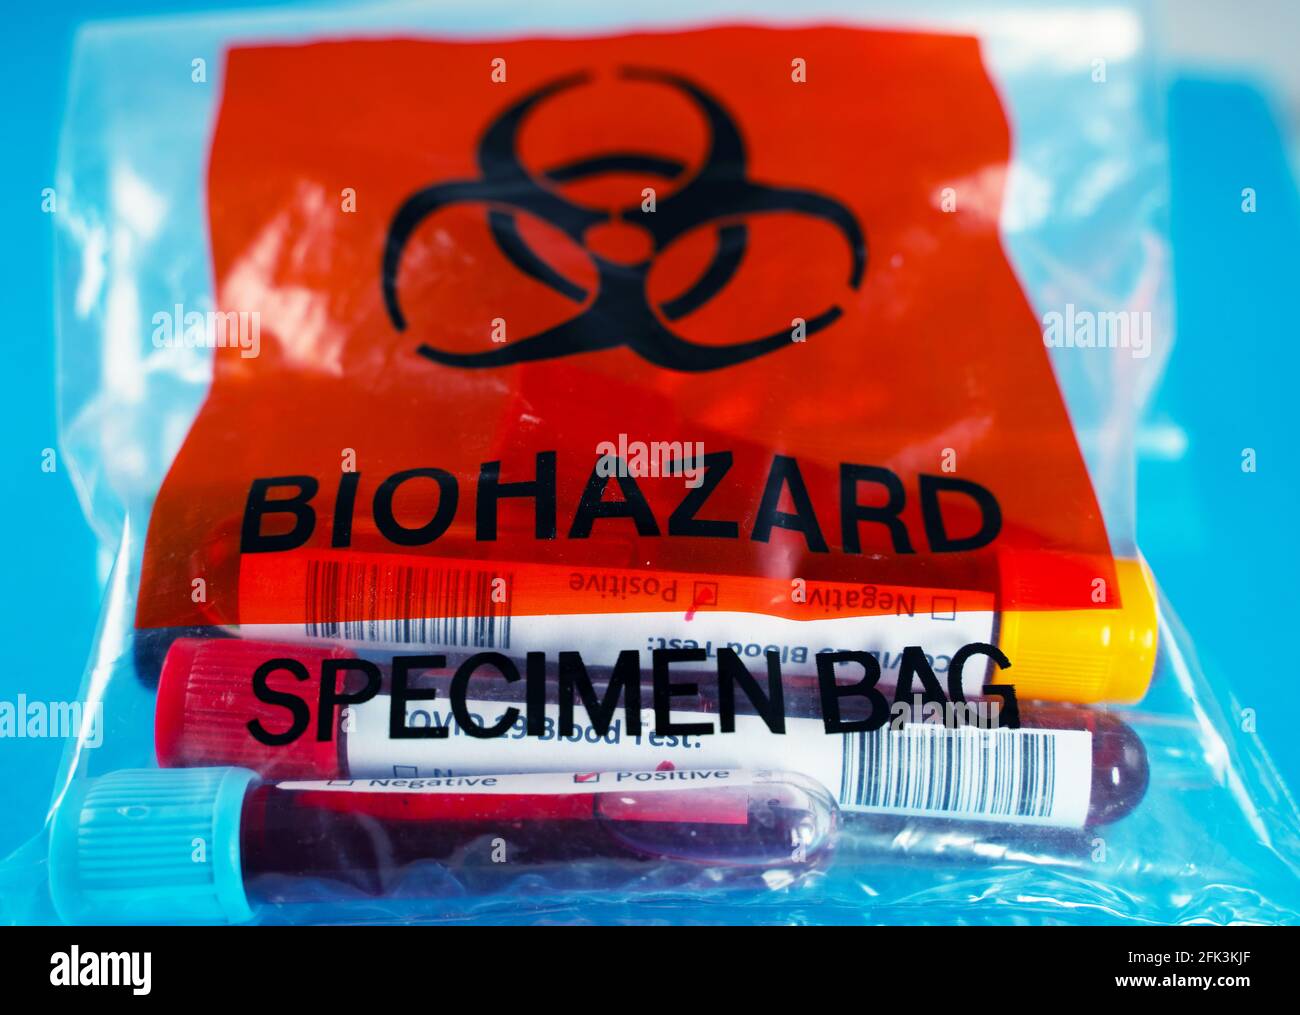 Covid patients blood samples in a medical waste bag. Medical Hazard Stock Photo